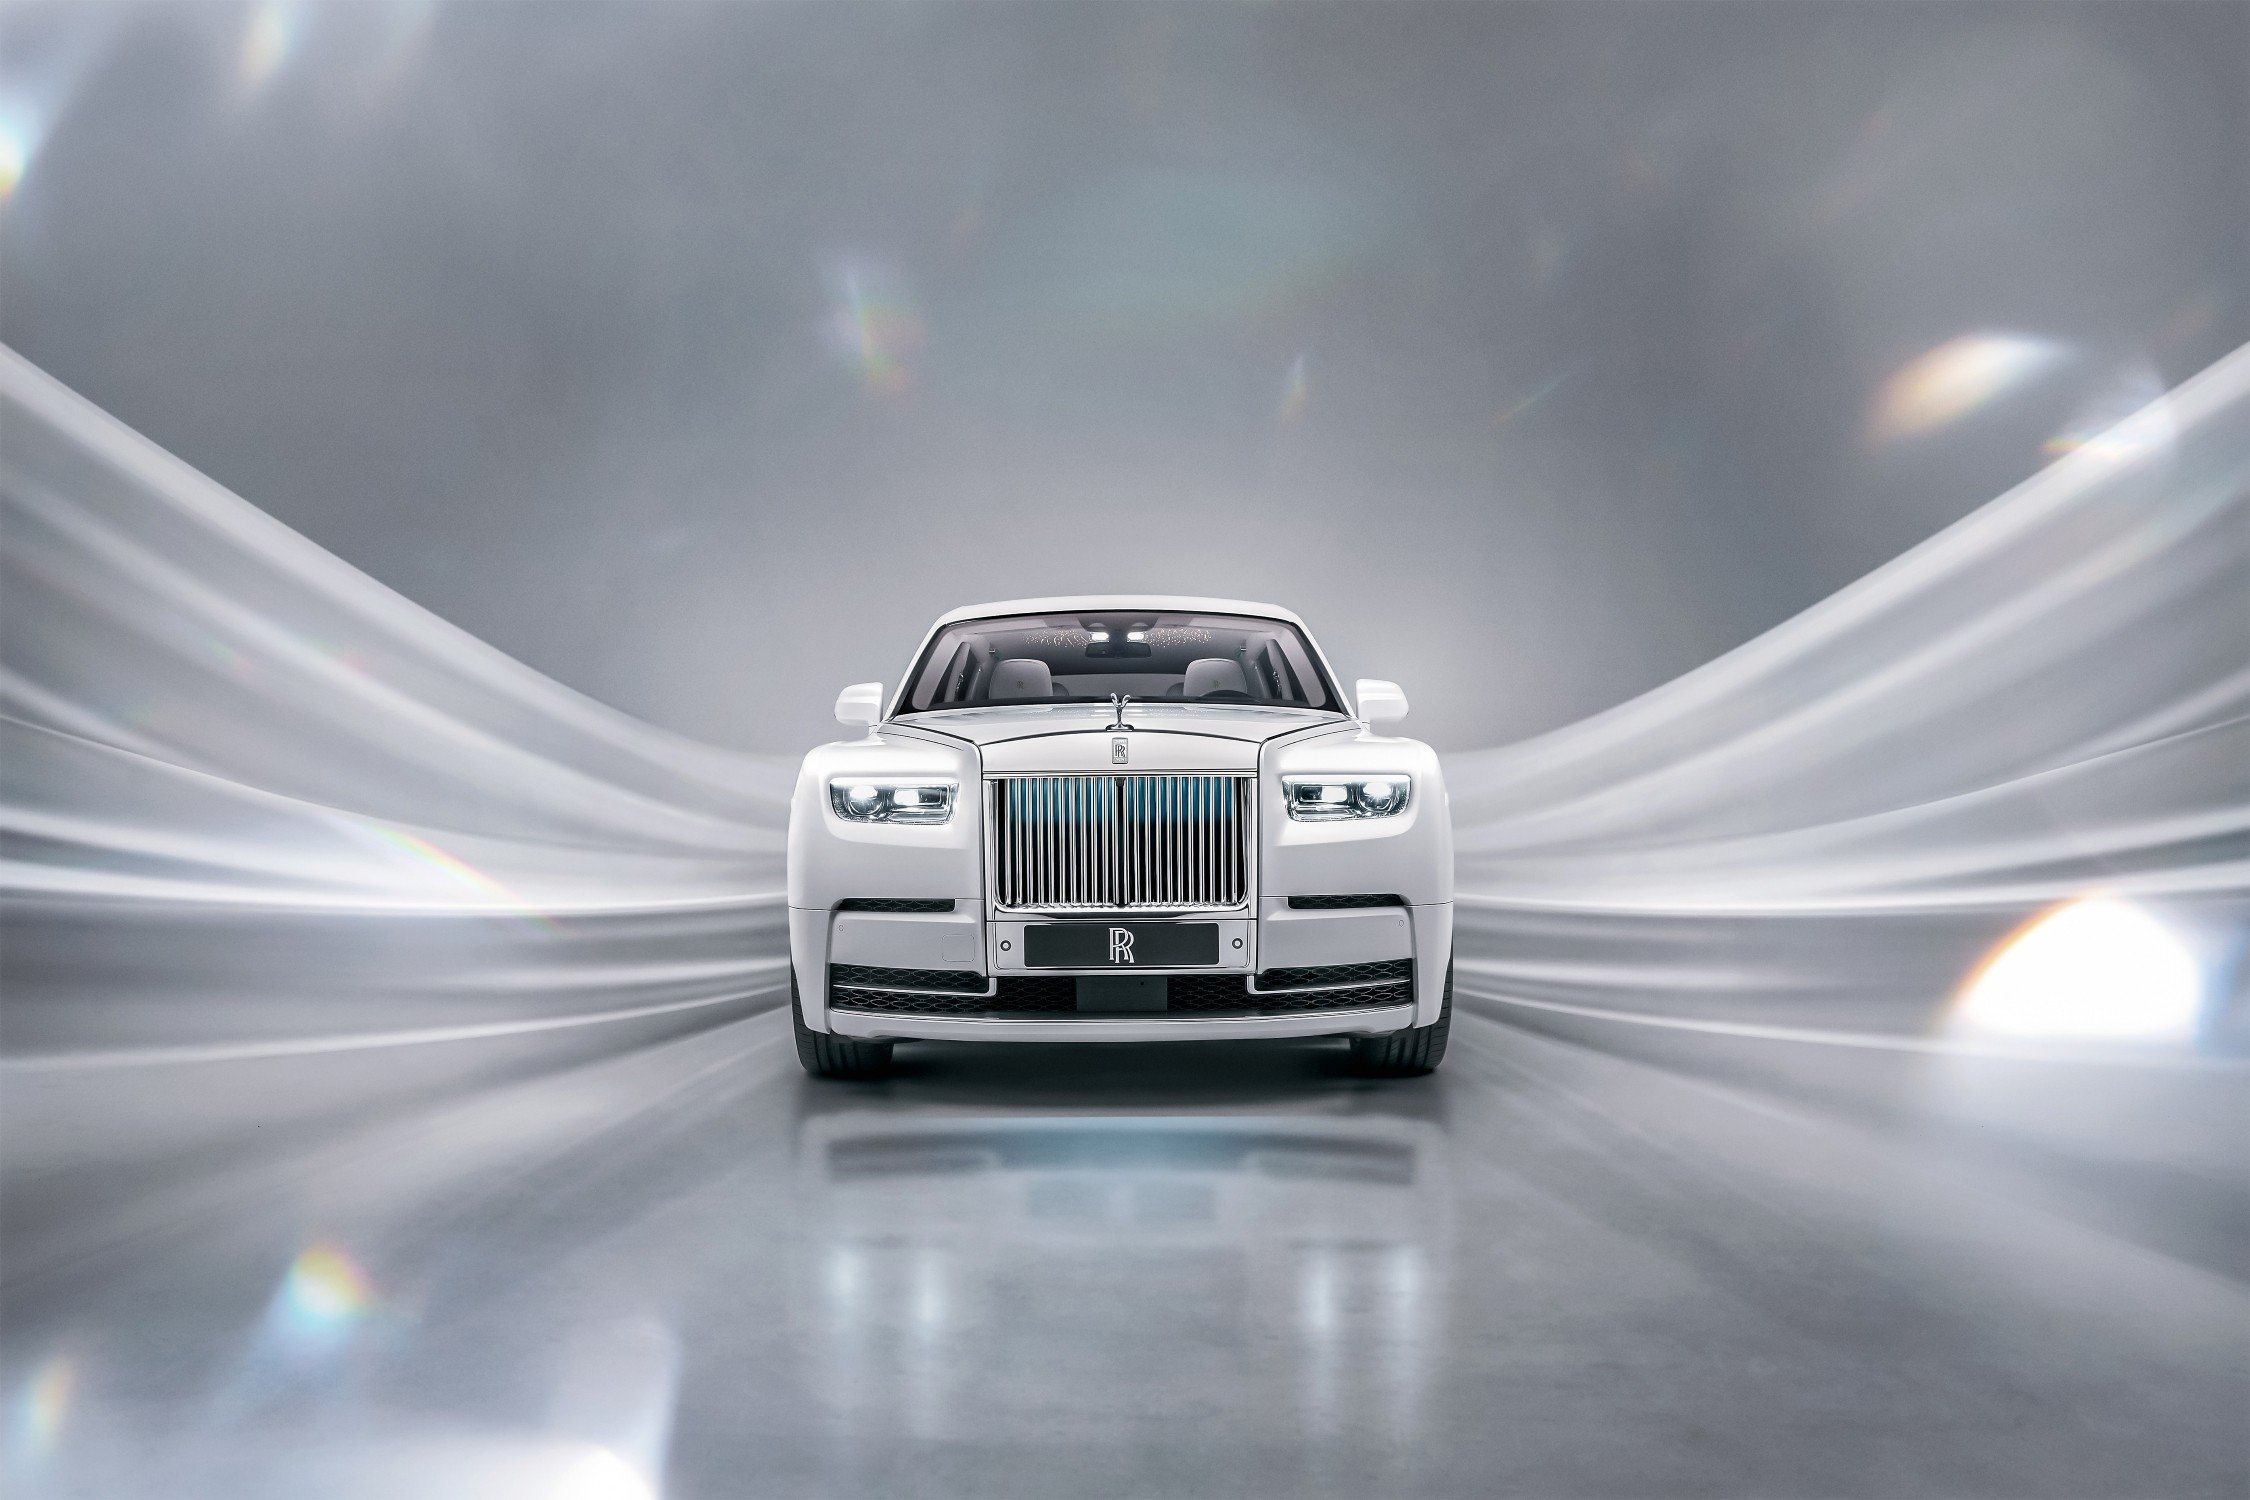 Rolls Royce Motor Cars Mark The Introduction Of #Phantom Series II And To Illustrate Our #Bespoke Capability, We Have Created A New Bespoke Masterpiece, Phantom Platino, Named After The Silver White